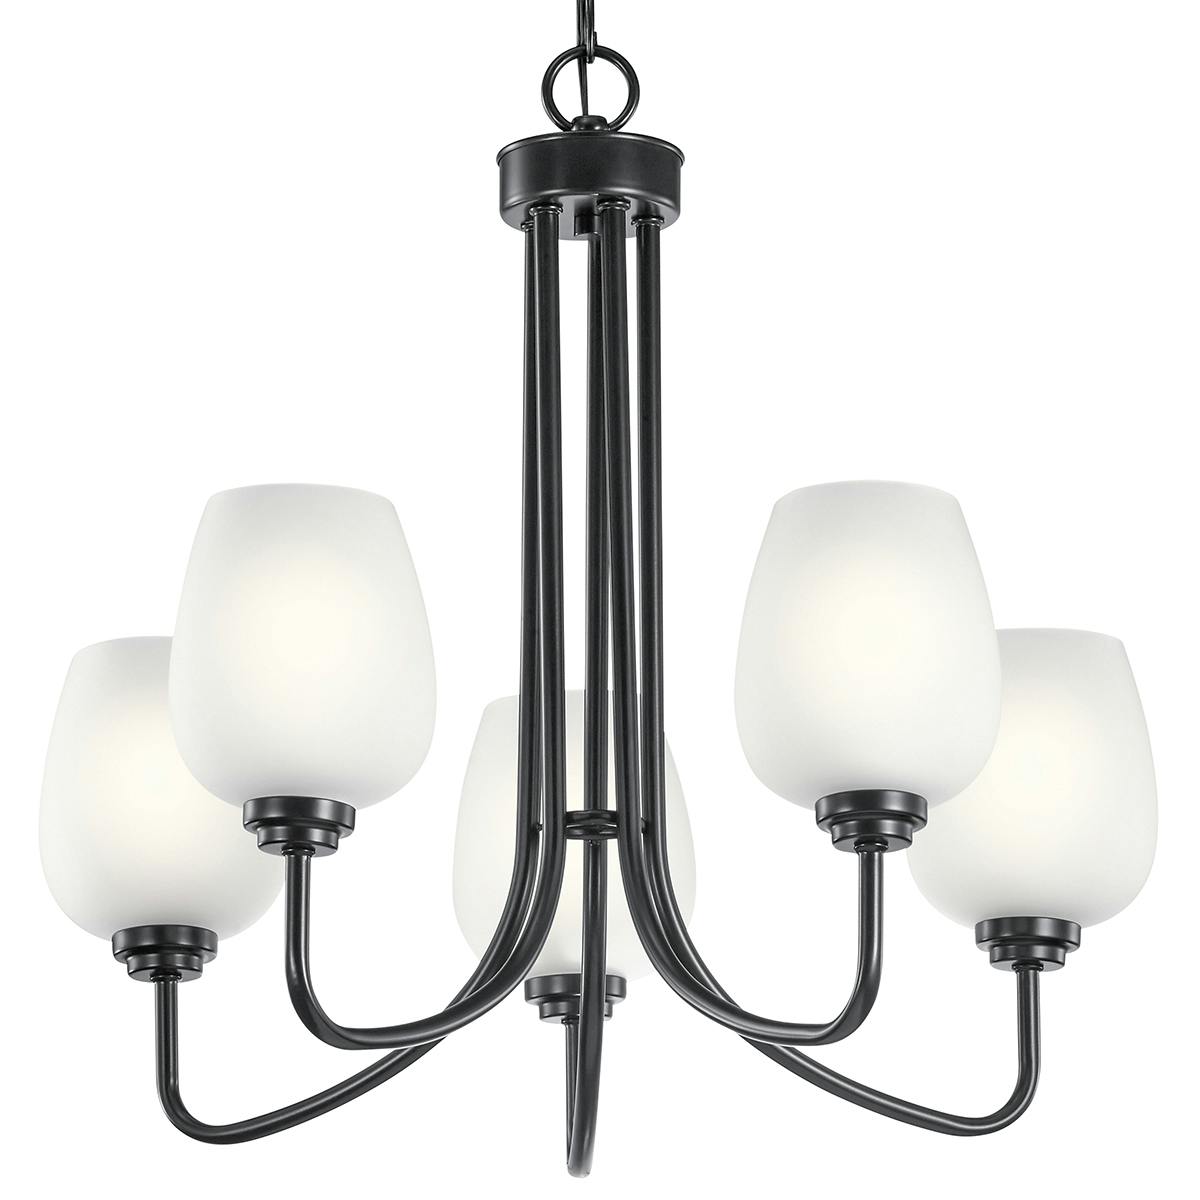 Close up view of the Valserrano 24.25" Chandelier Black on a white background